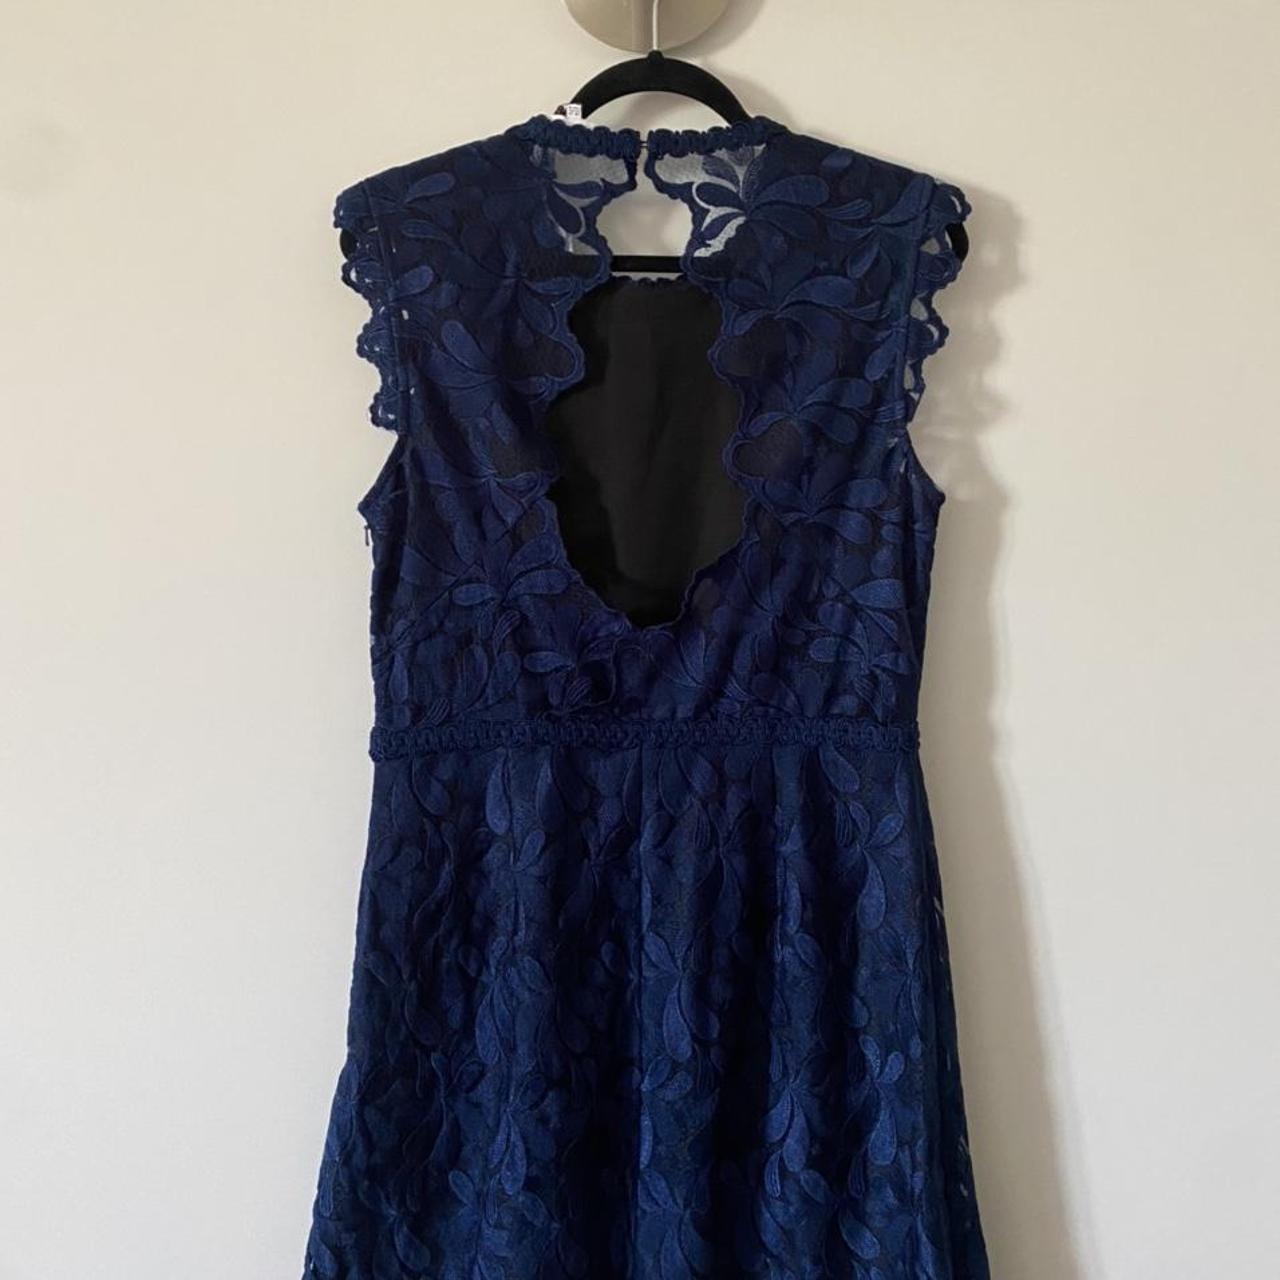 Beautiful brand new with tags Reisse dress - Depop